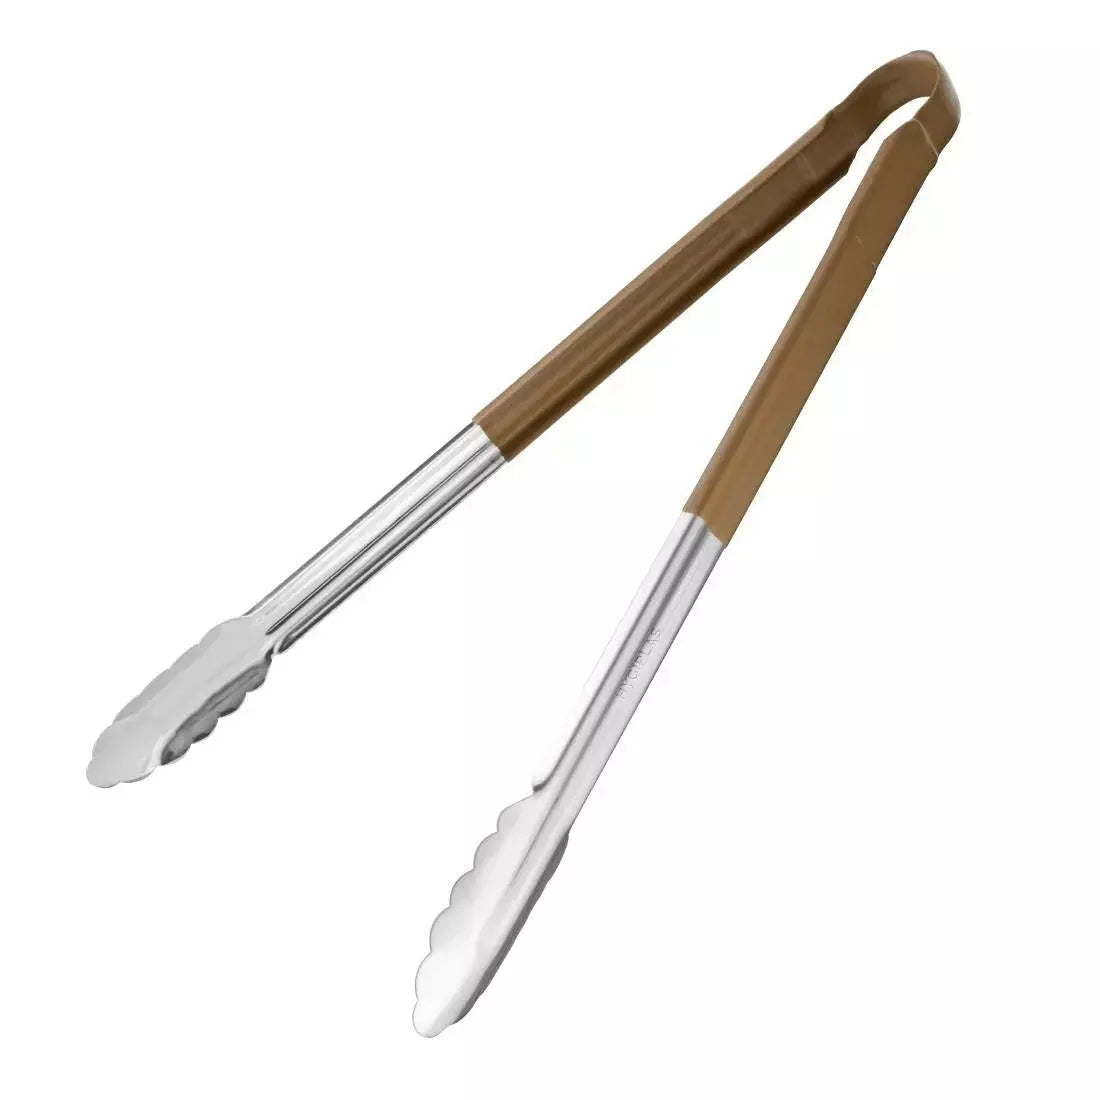 Hygiplas Colour Coded Brown Serving Tongs 405mm